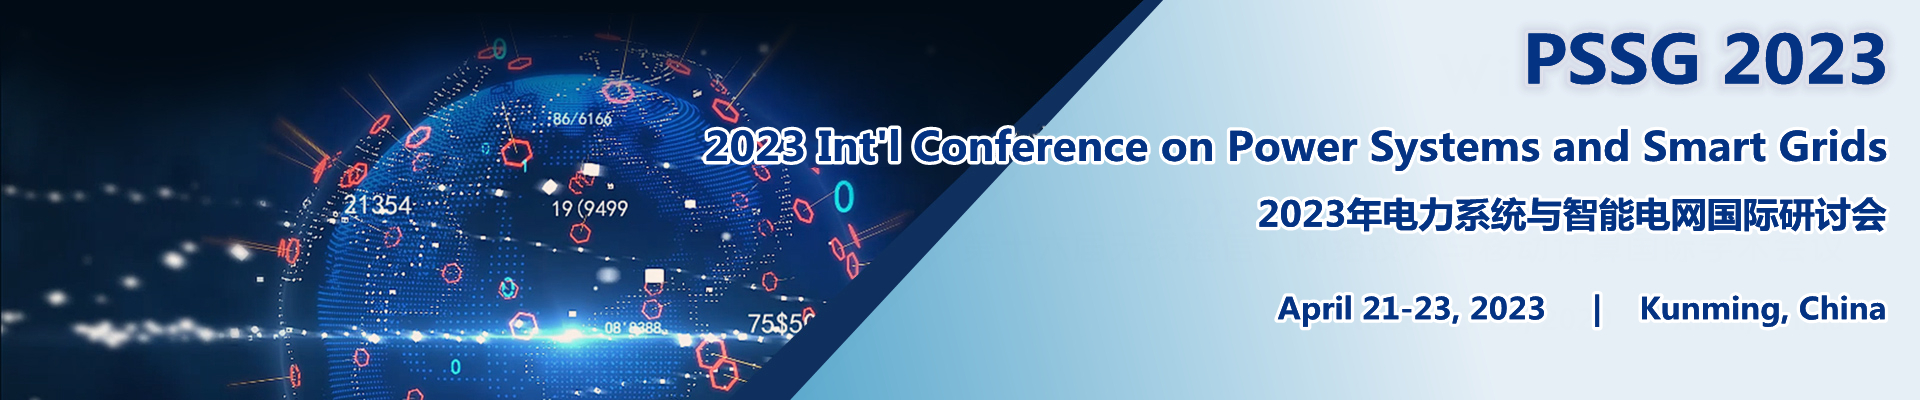 2023 Int'l Conference on Power Systems and Smart Grids (PSSG 2023)